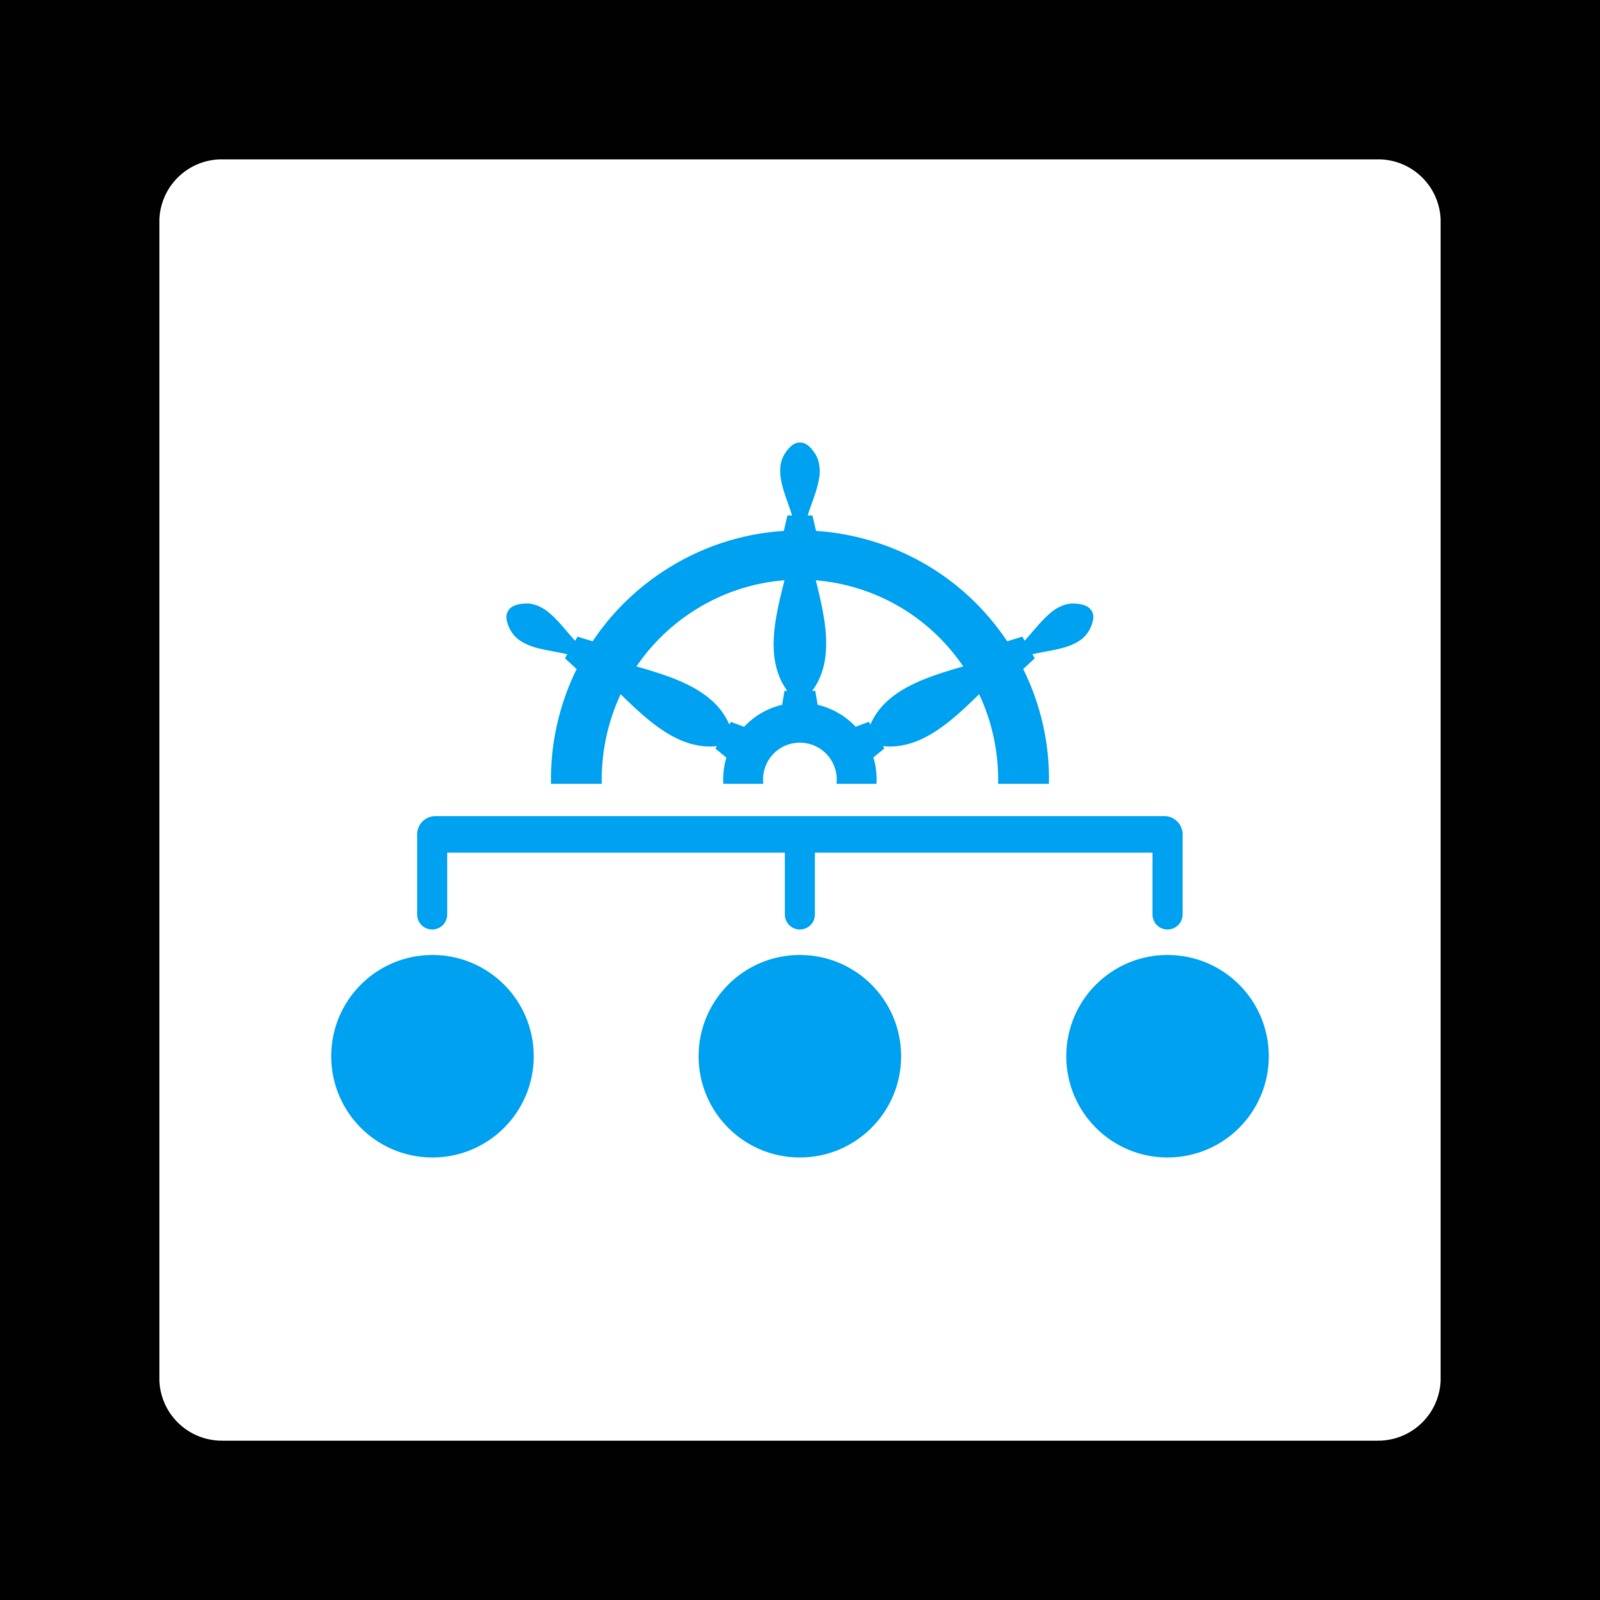 Rule icon. Vector style is blue and white colors, flat rounded square button on a black background.